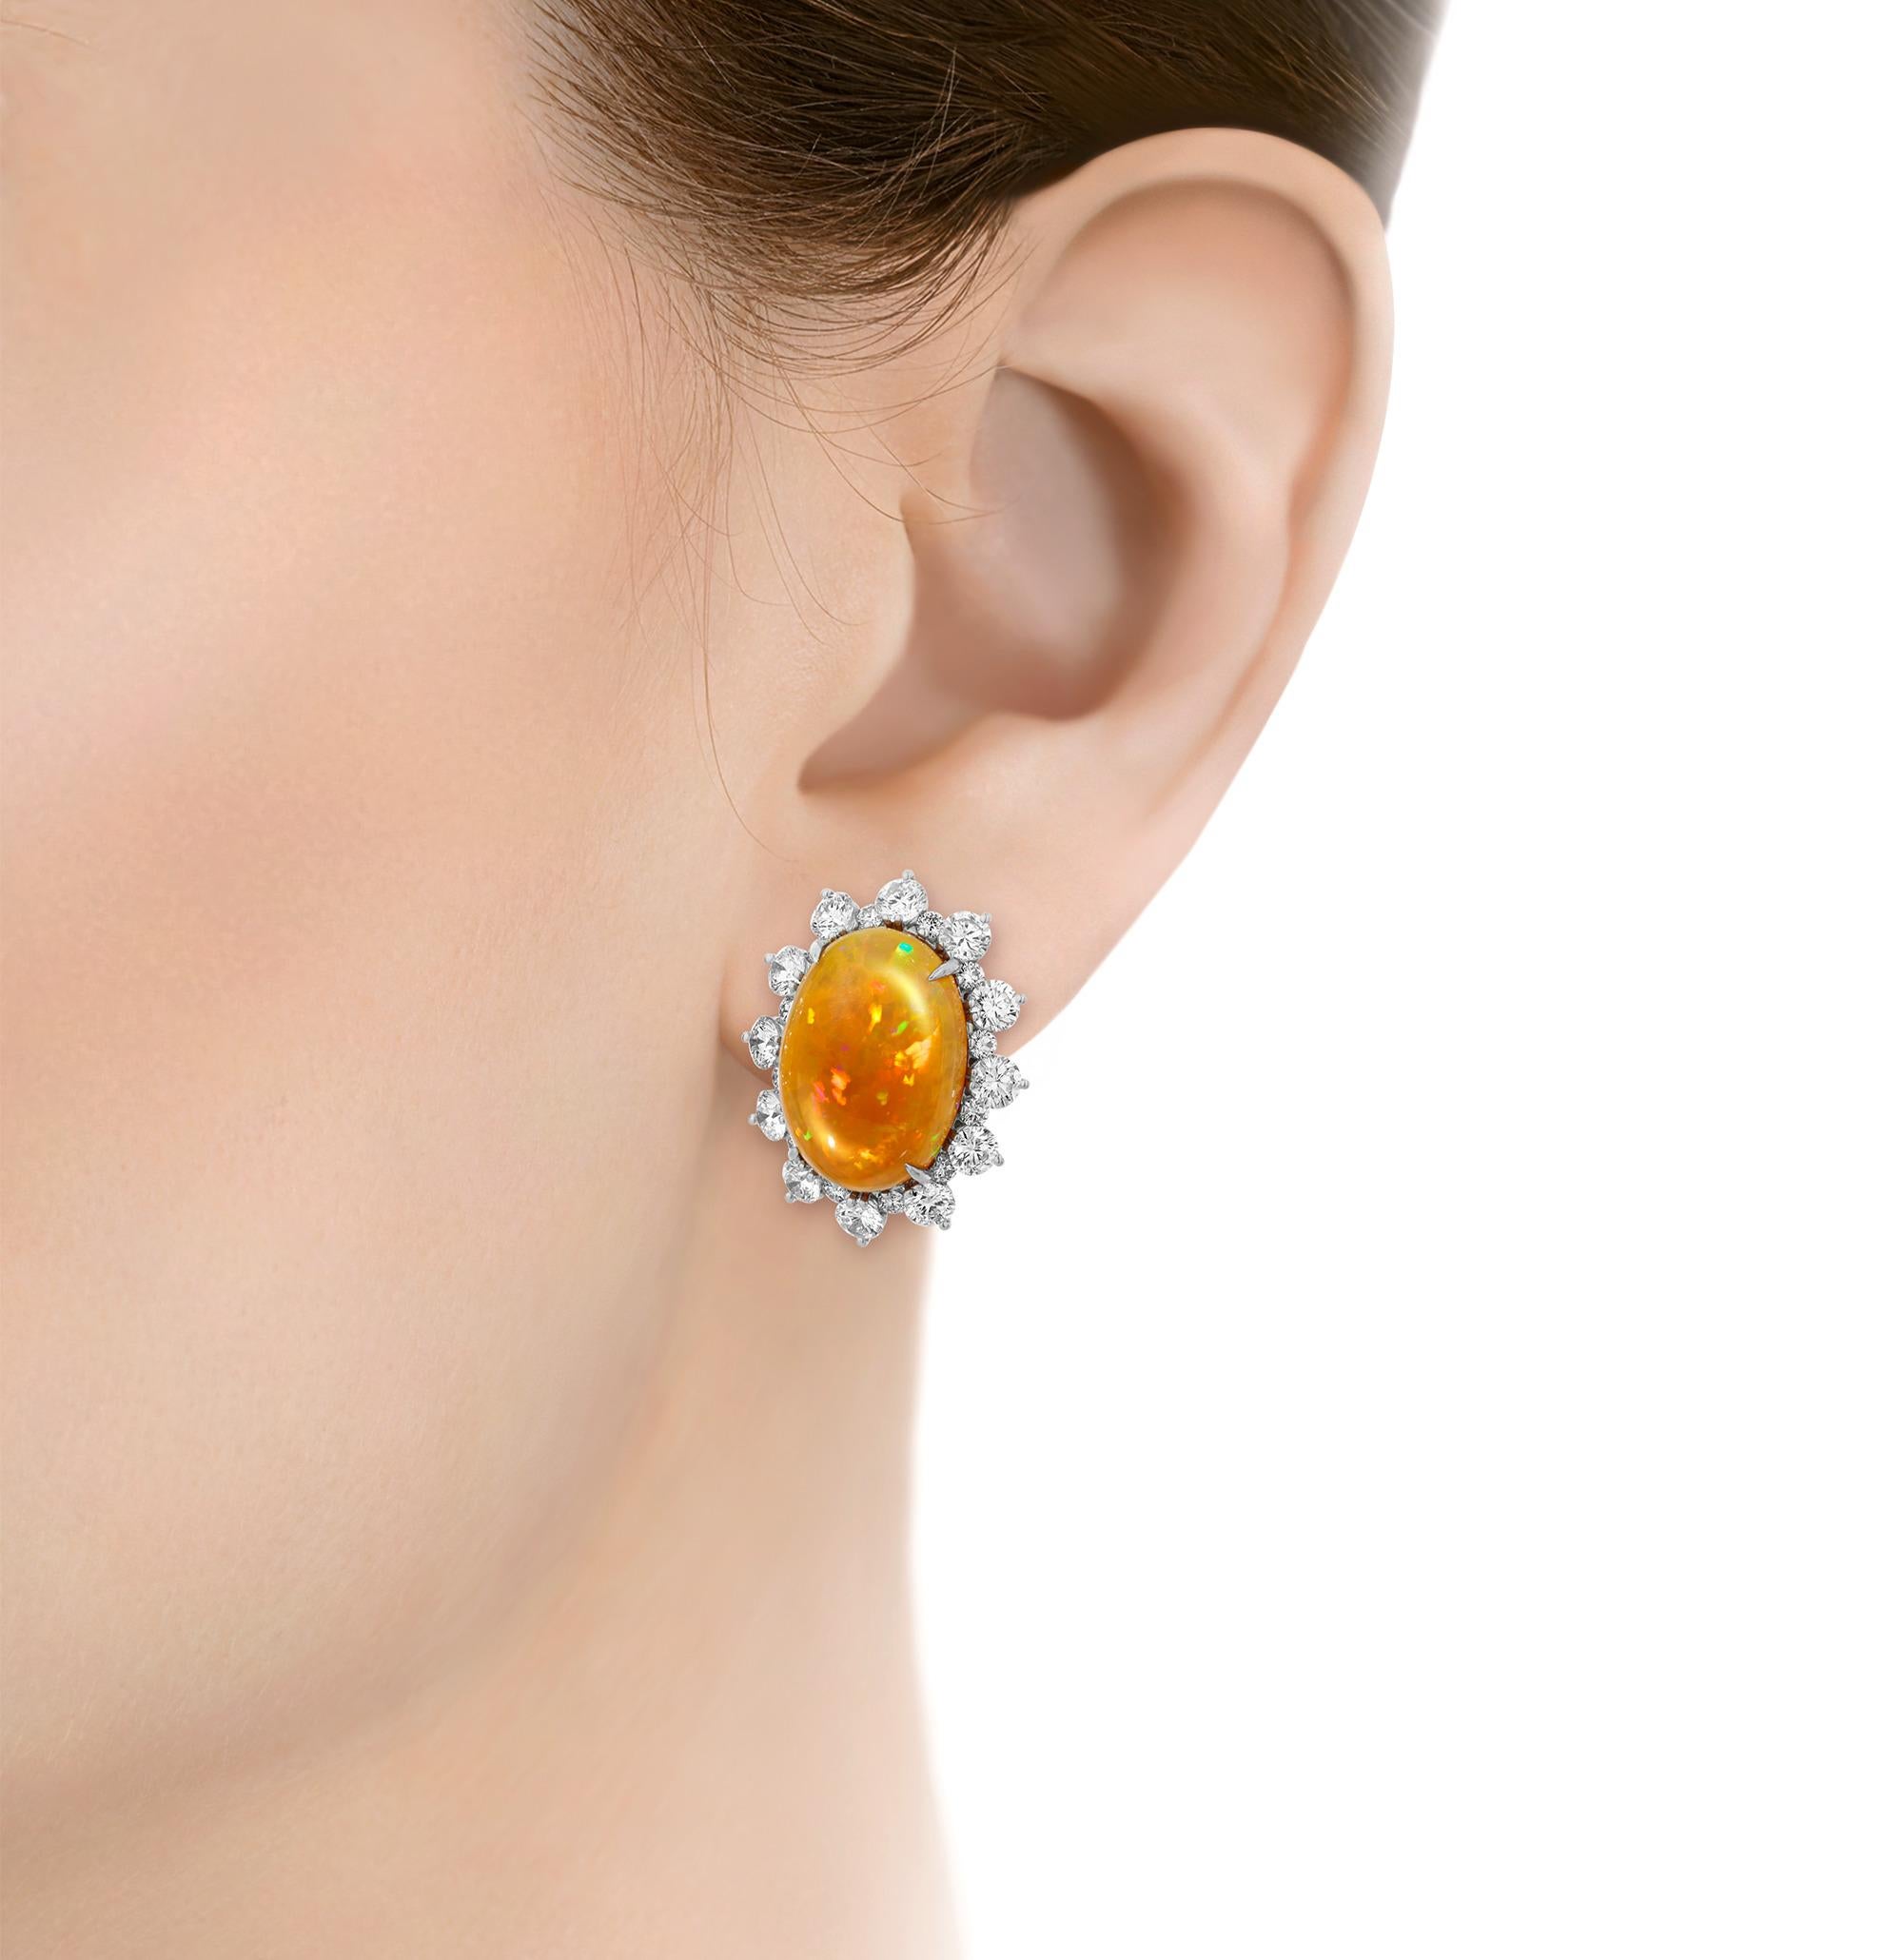 A stunning interplay of fire and ice, two perfectly matched cabochon fire opals coalesce with sparkling diamonds to form these statement earrings. Totaling an impressive 13.40 carats, the fire opals display the bold orange and golden hues for which